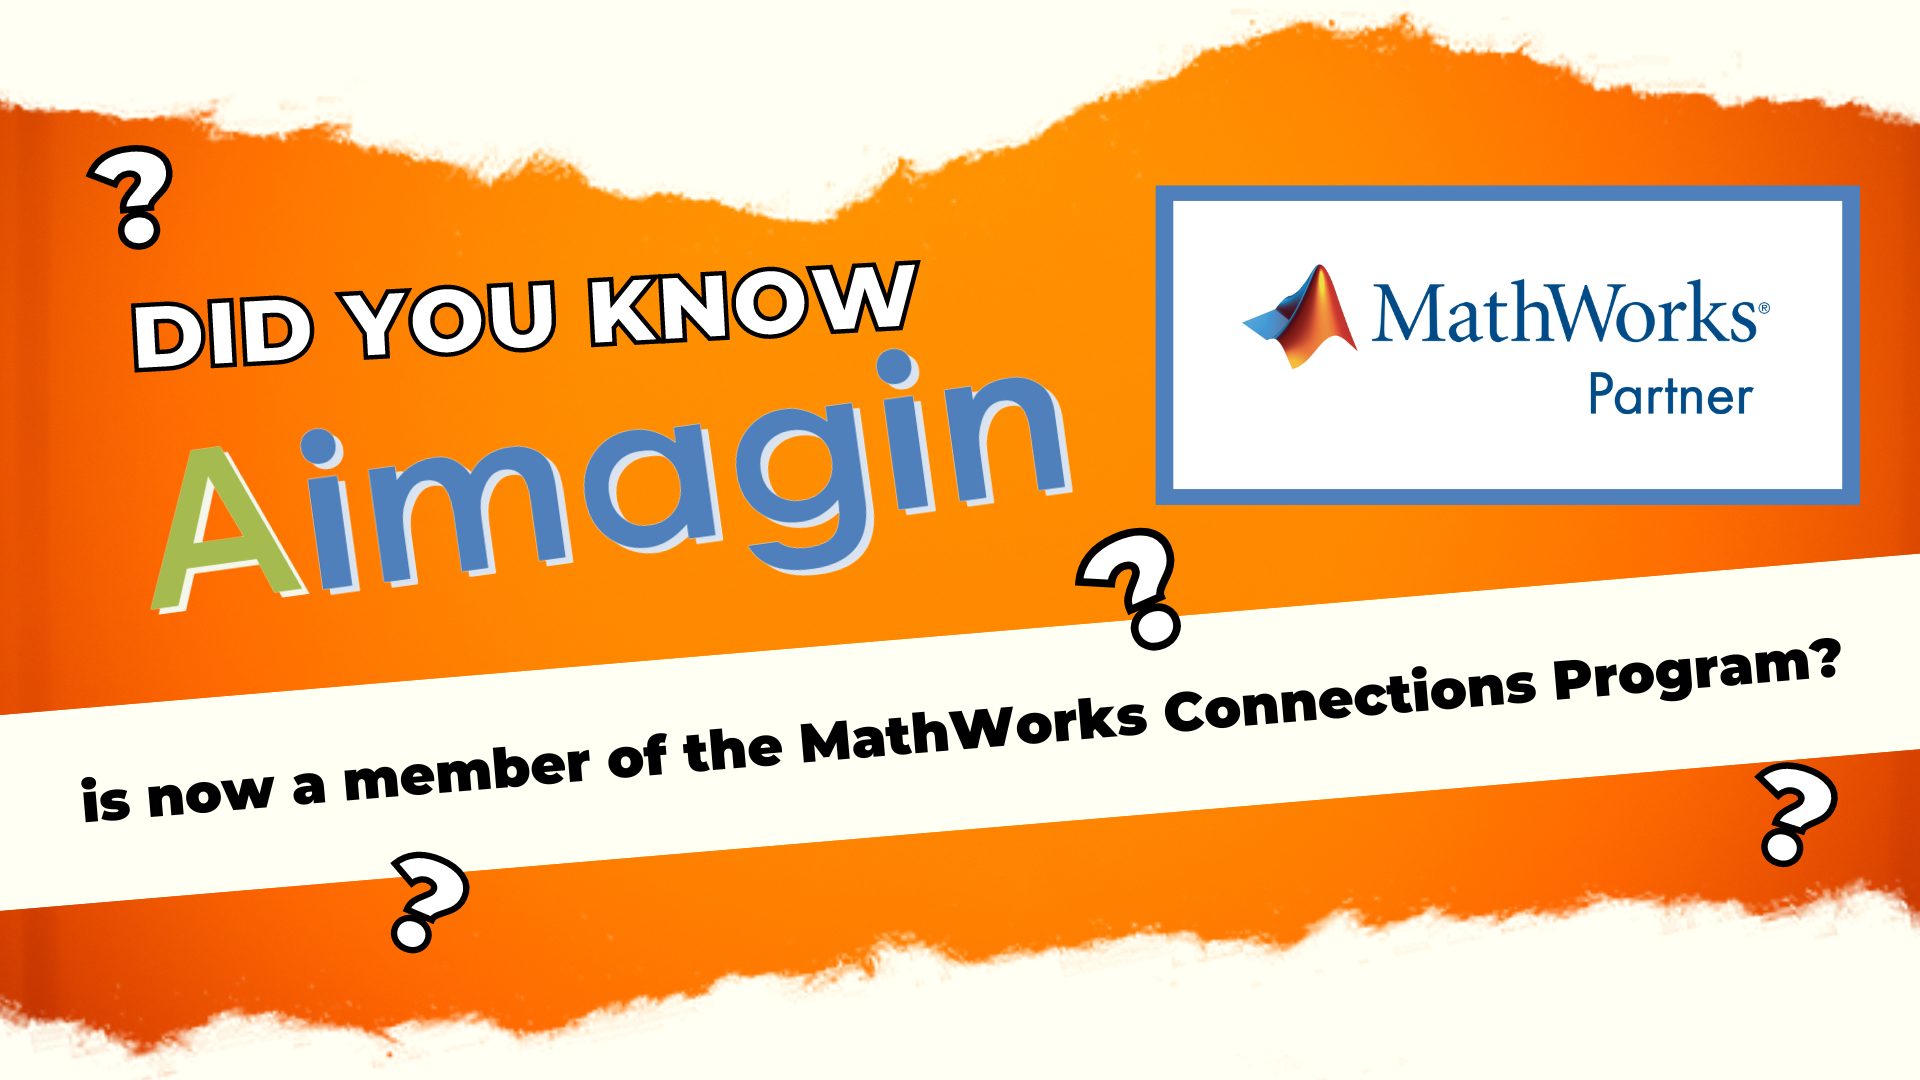 Aimagin is partner with Mathworks!